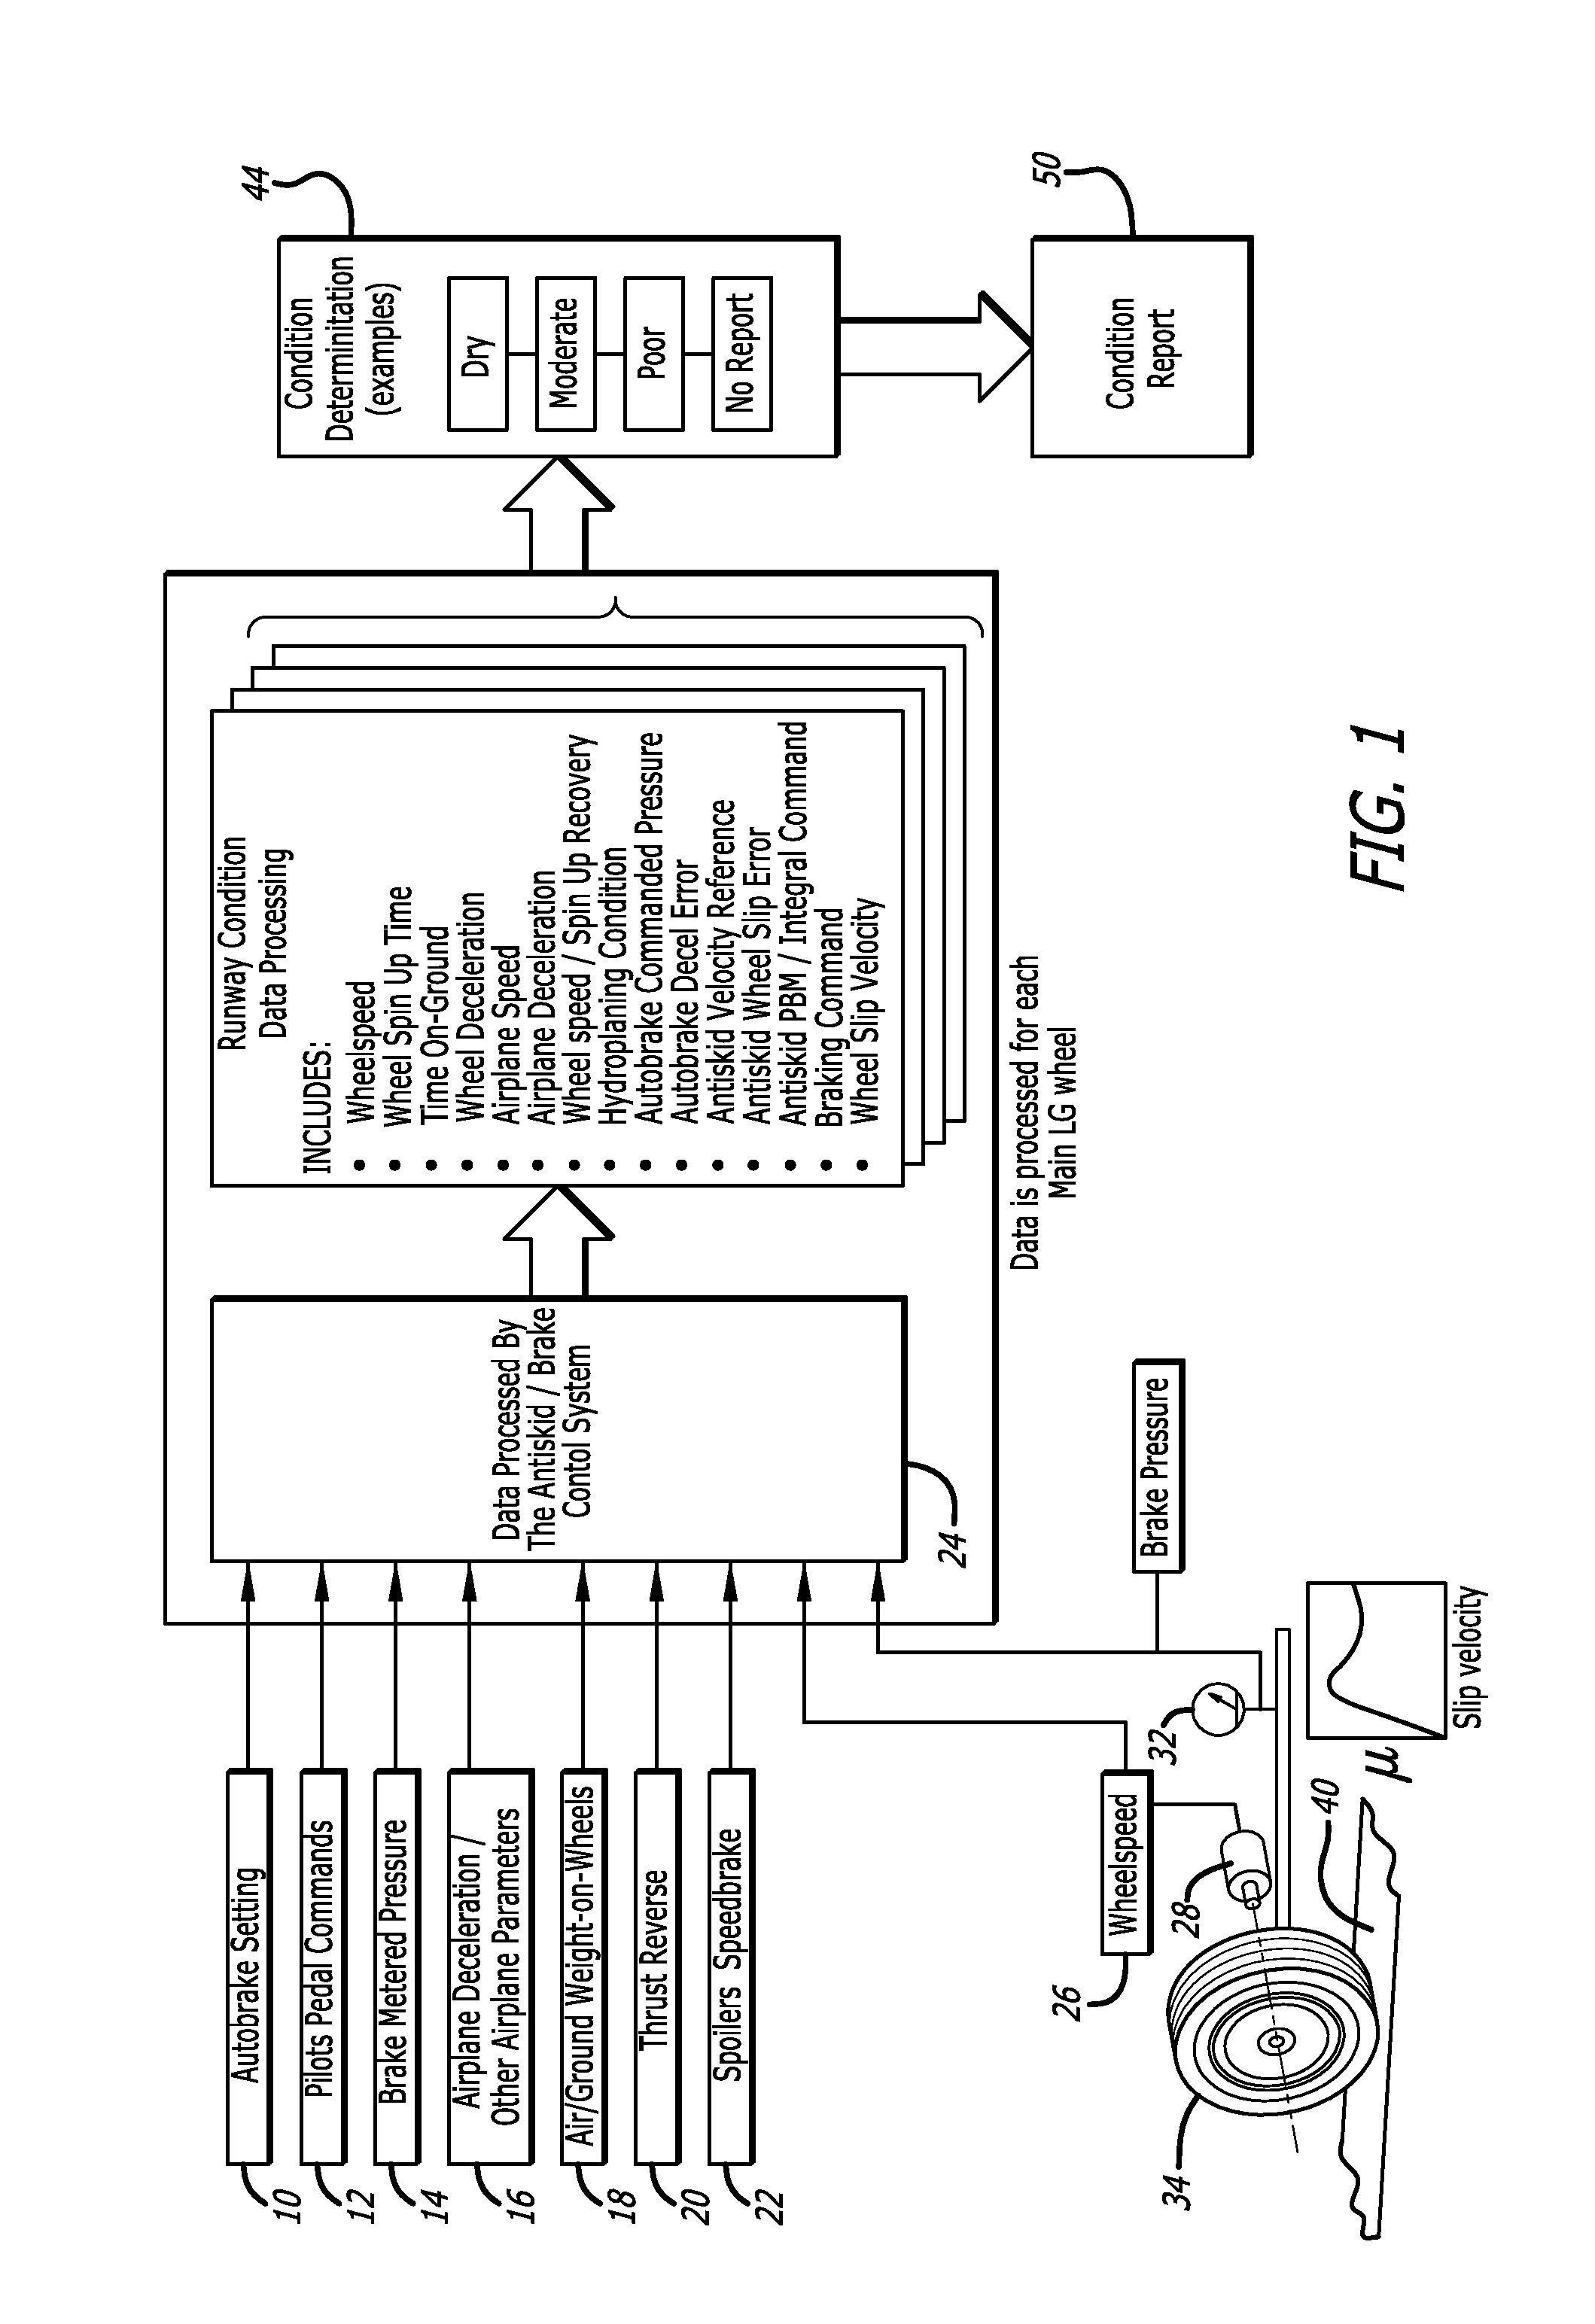 Method of reporting runway condition using brake control system